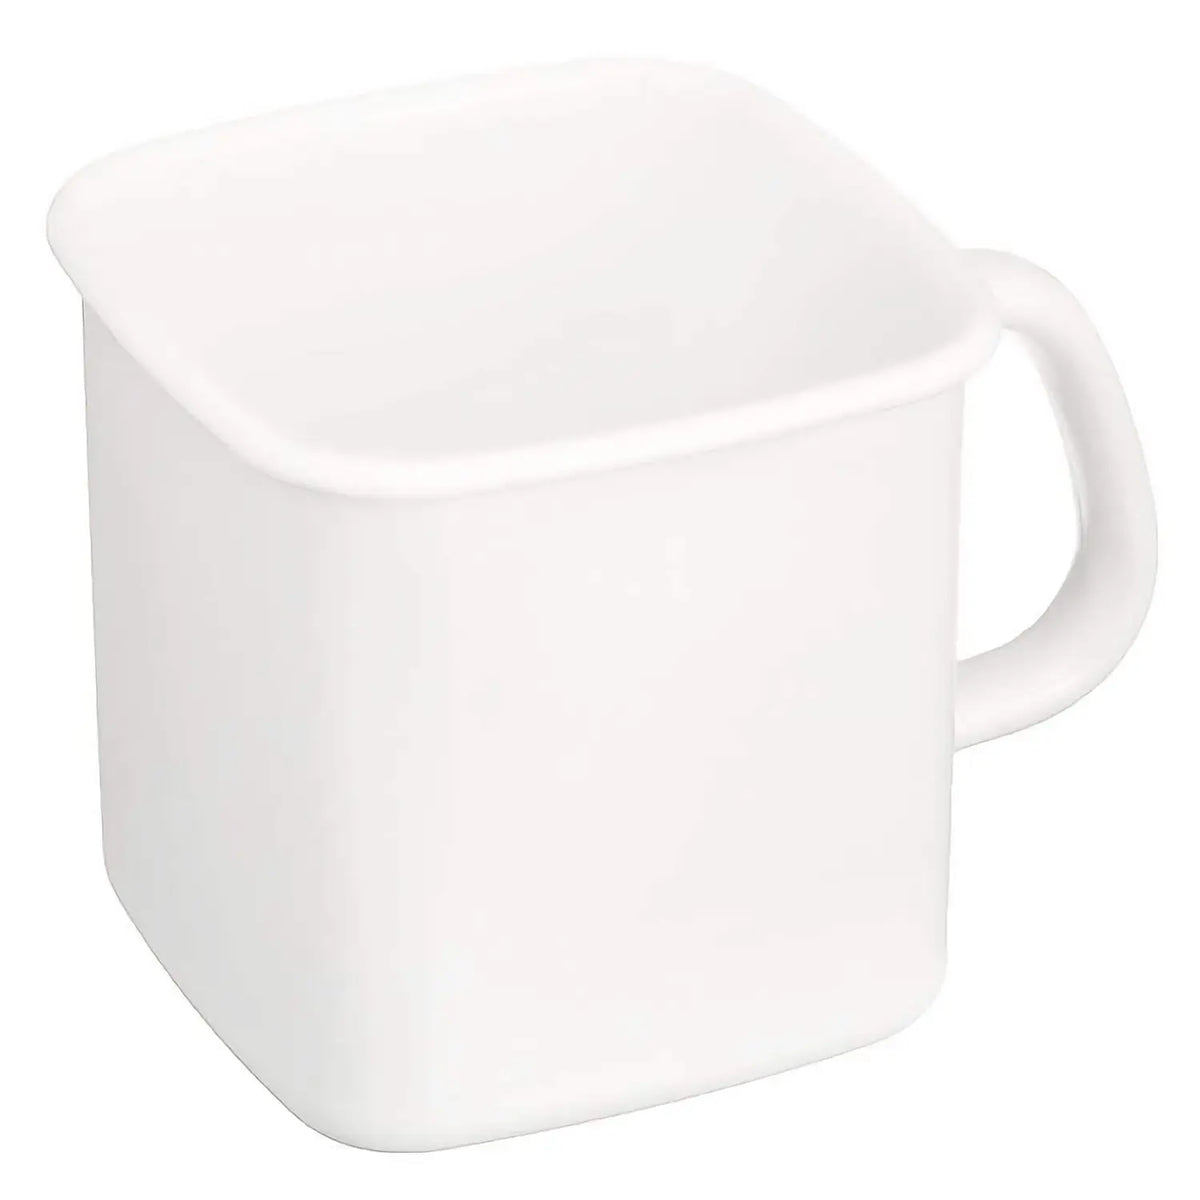 Noda Horo White Series Enamel Square Food Containers with Handle and Lid 1.2L